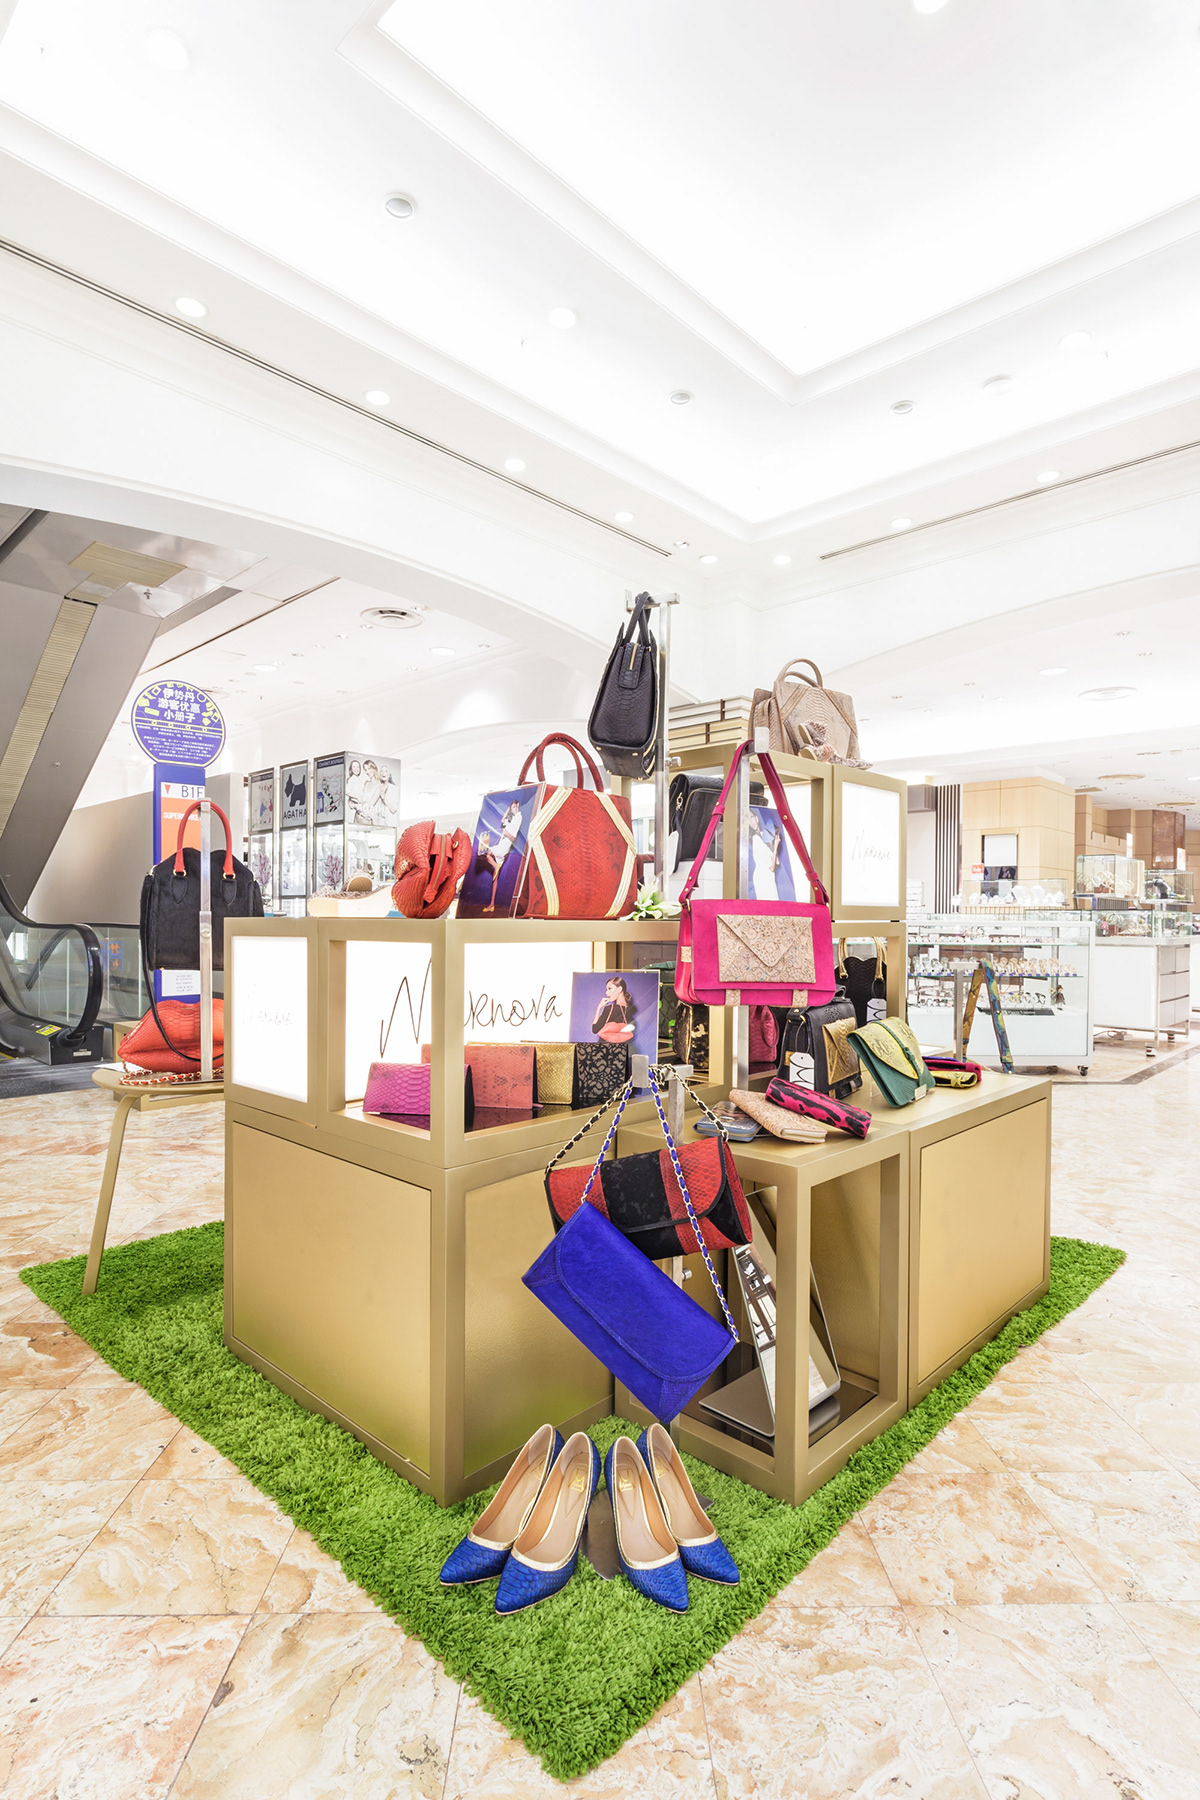 Marnova indonesia singapore Isetan store shoes bags phyton leather accessories Canon Interior